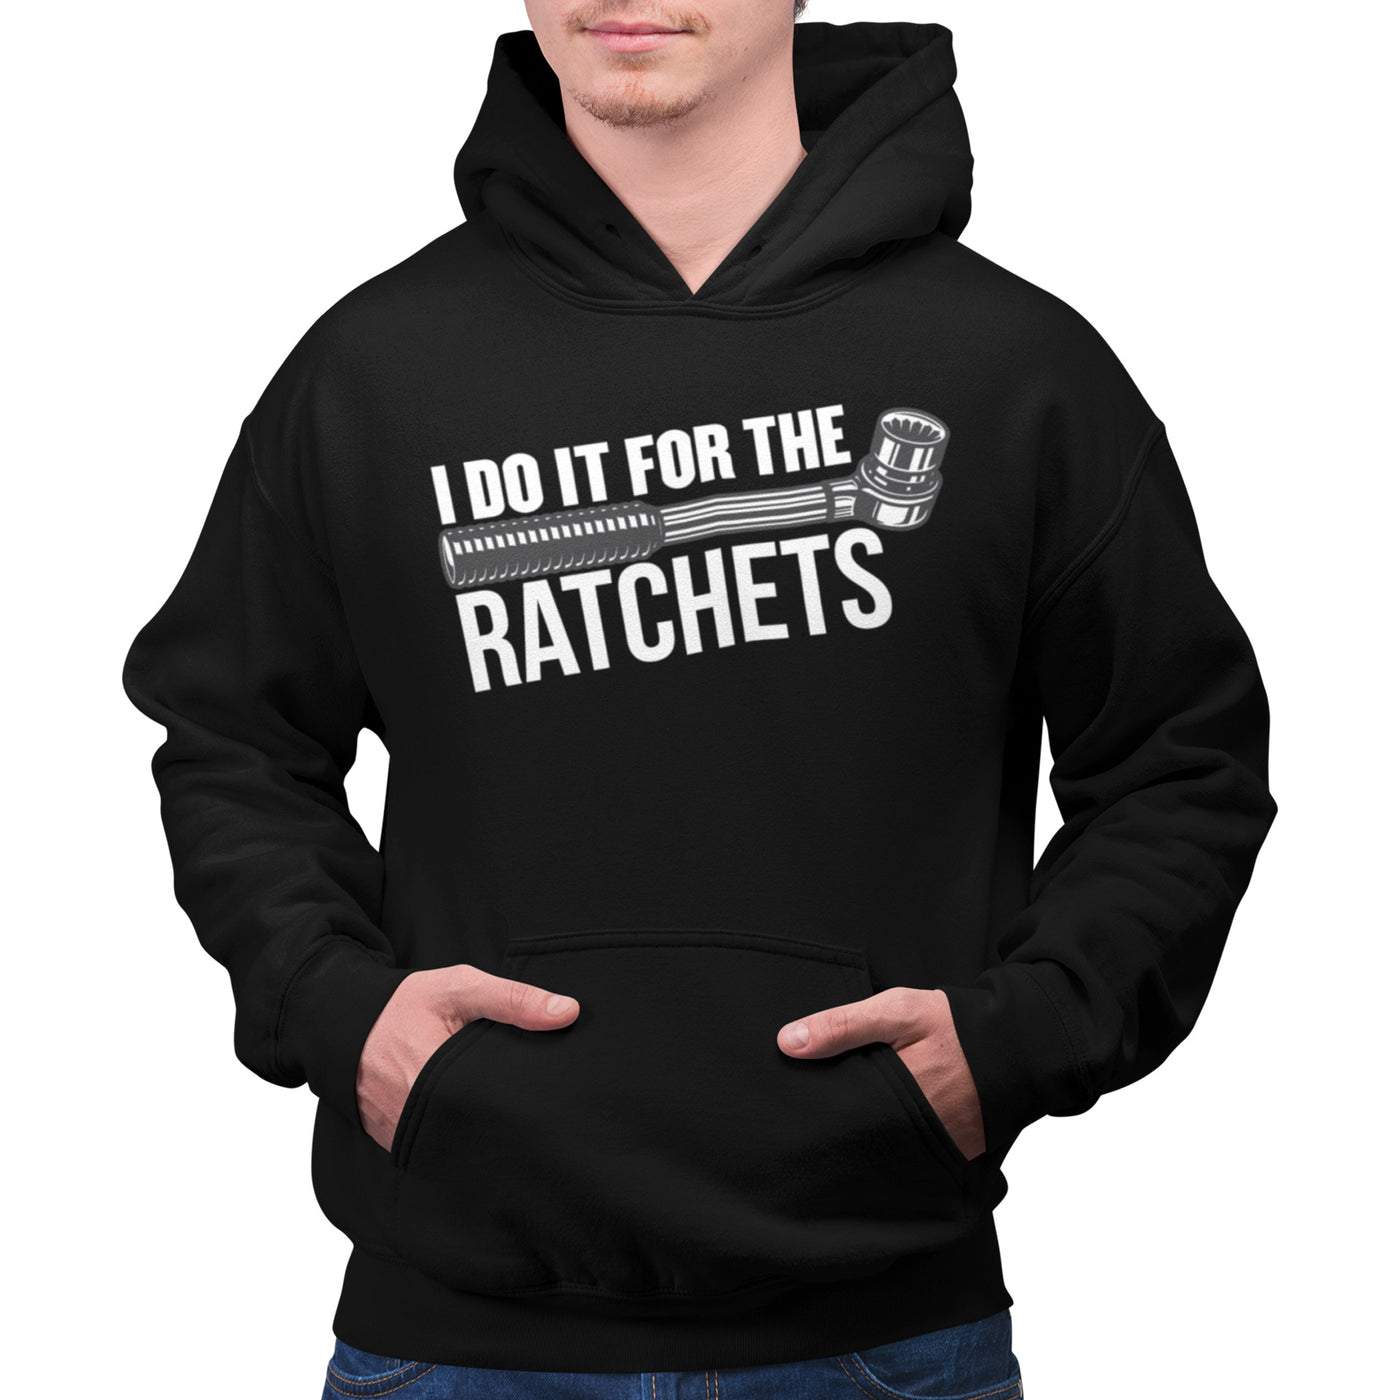 I DO IT FOR THE RATCHETS Hoodie